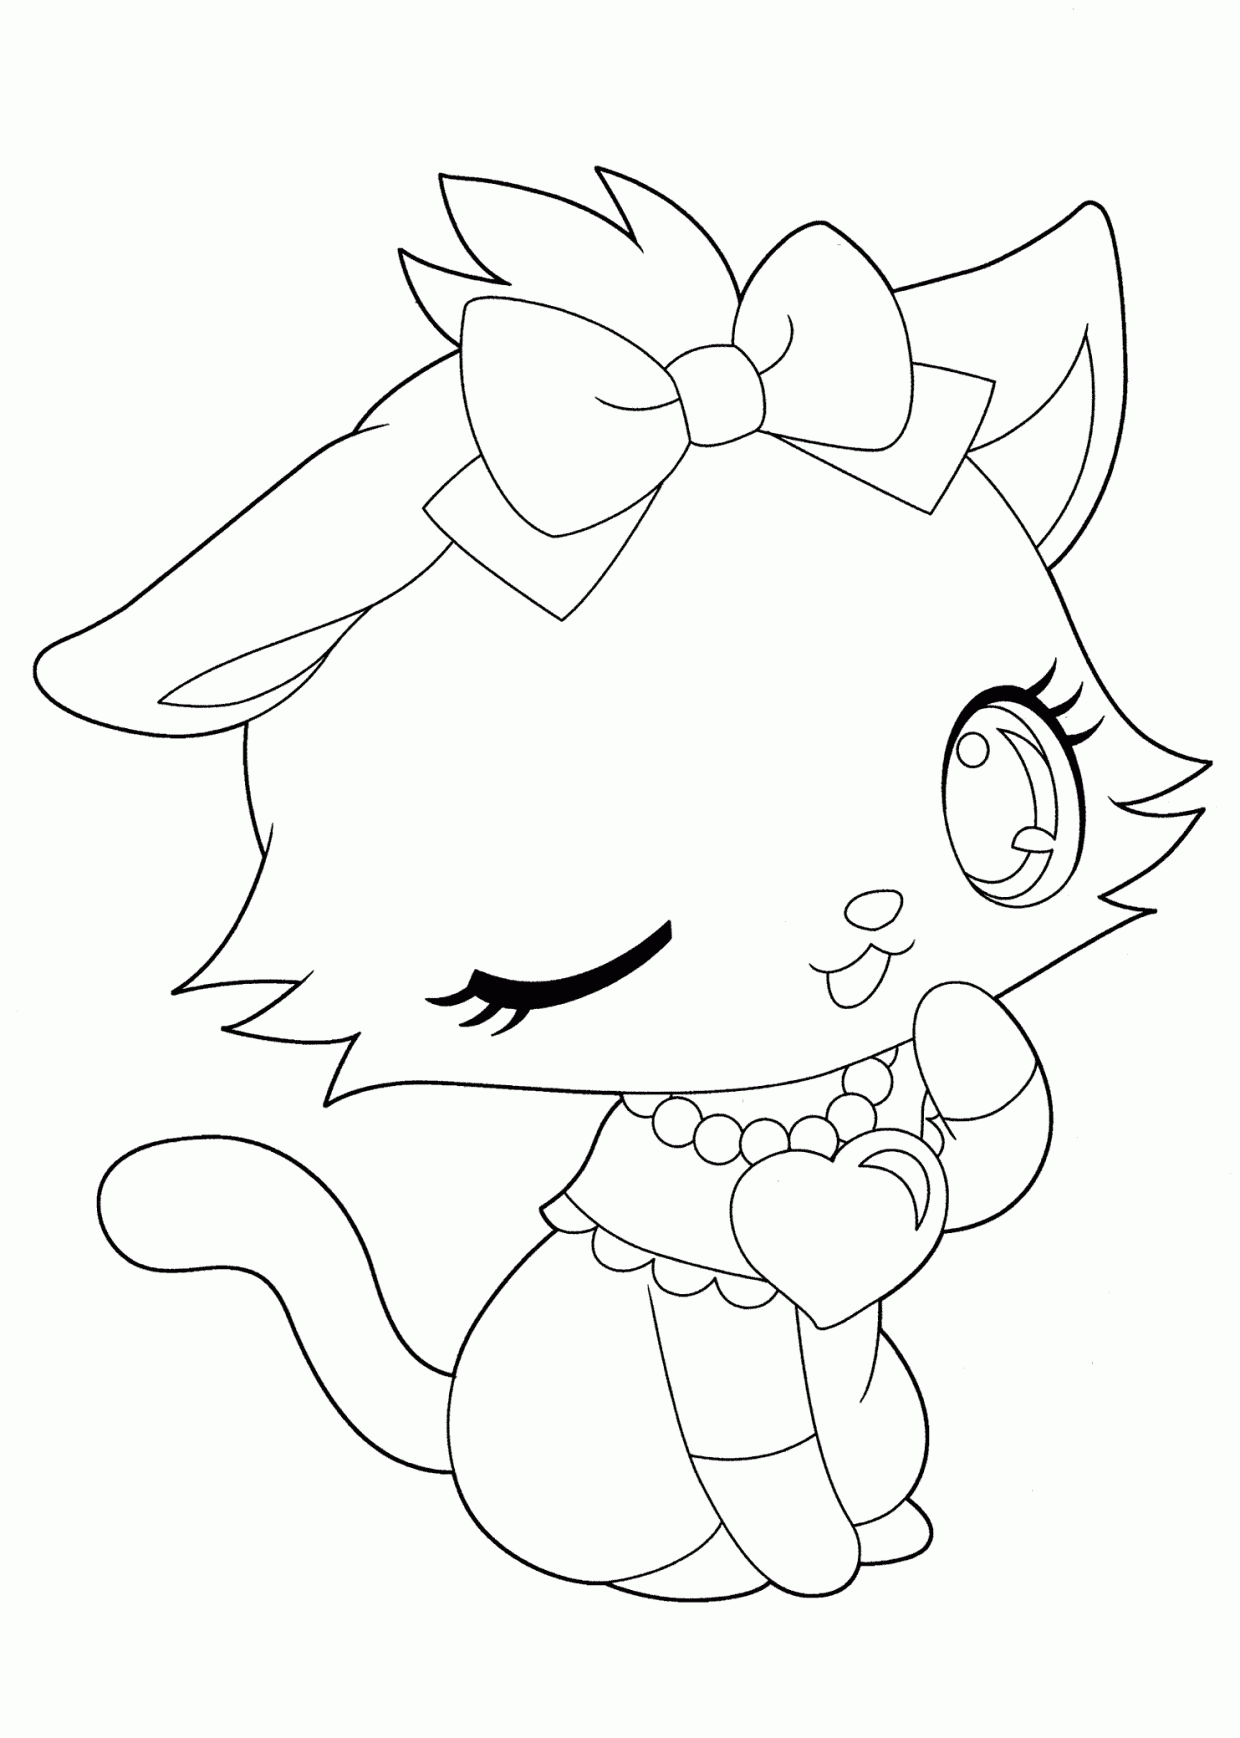 Happy Cat is Sleeping Coloring Page - Anime Coloring Pages